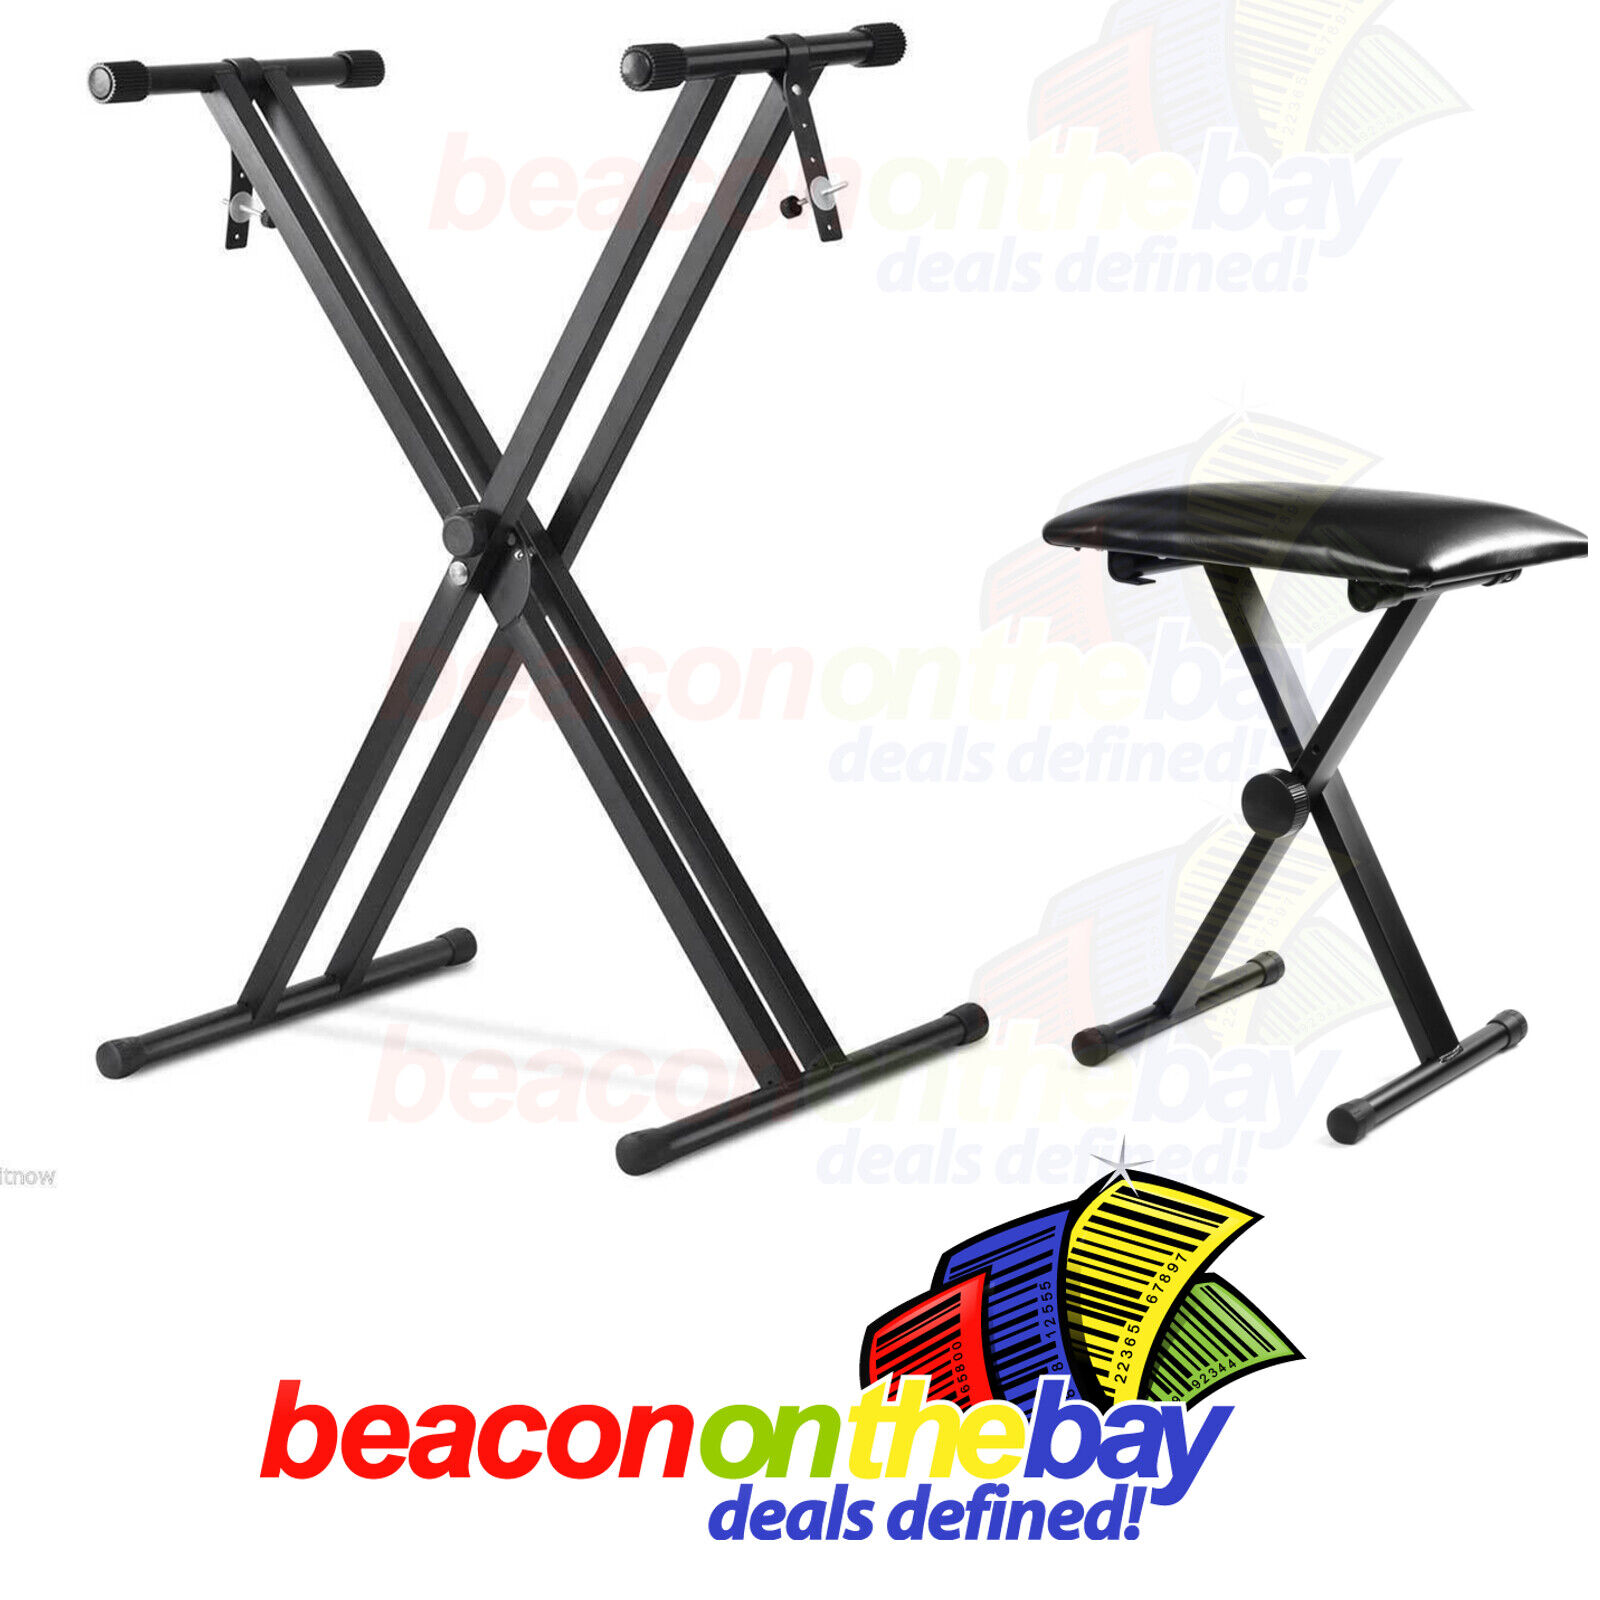 Adjustable Keyboard Stand Piano Stool Set Seat Folding Bench Chair Portable Seat Ashtec Does Not Apply